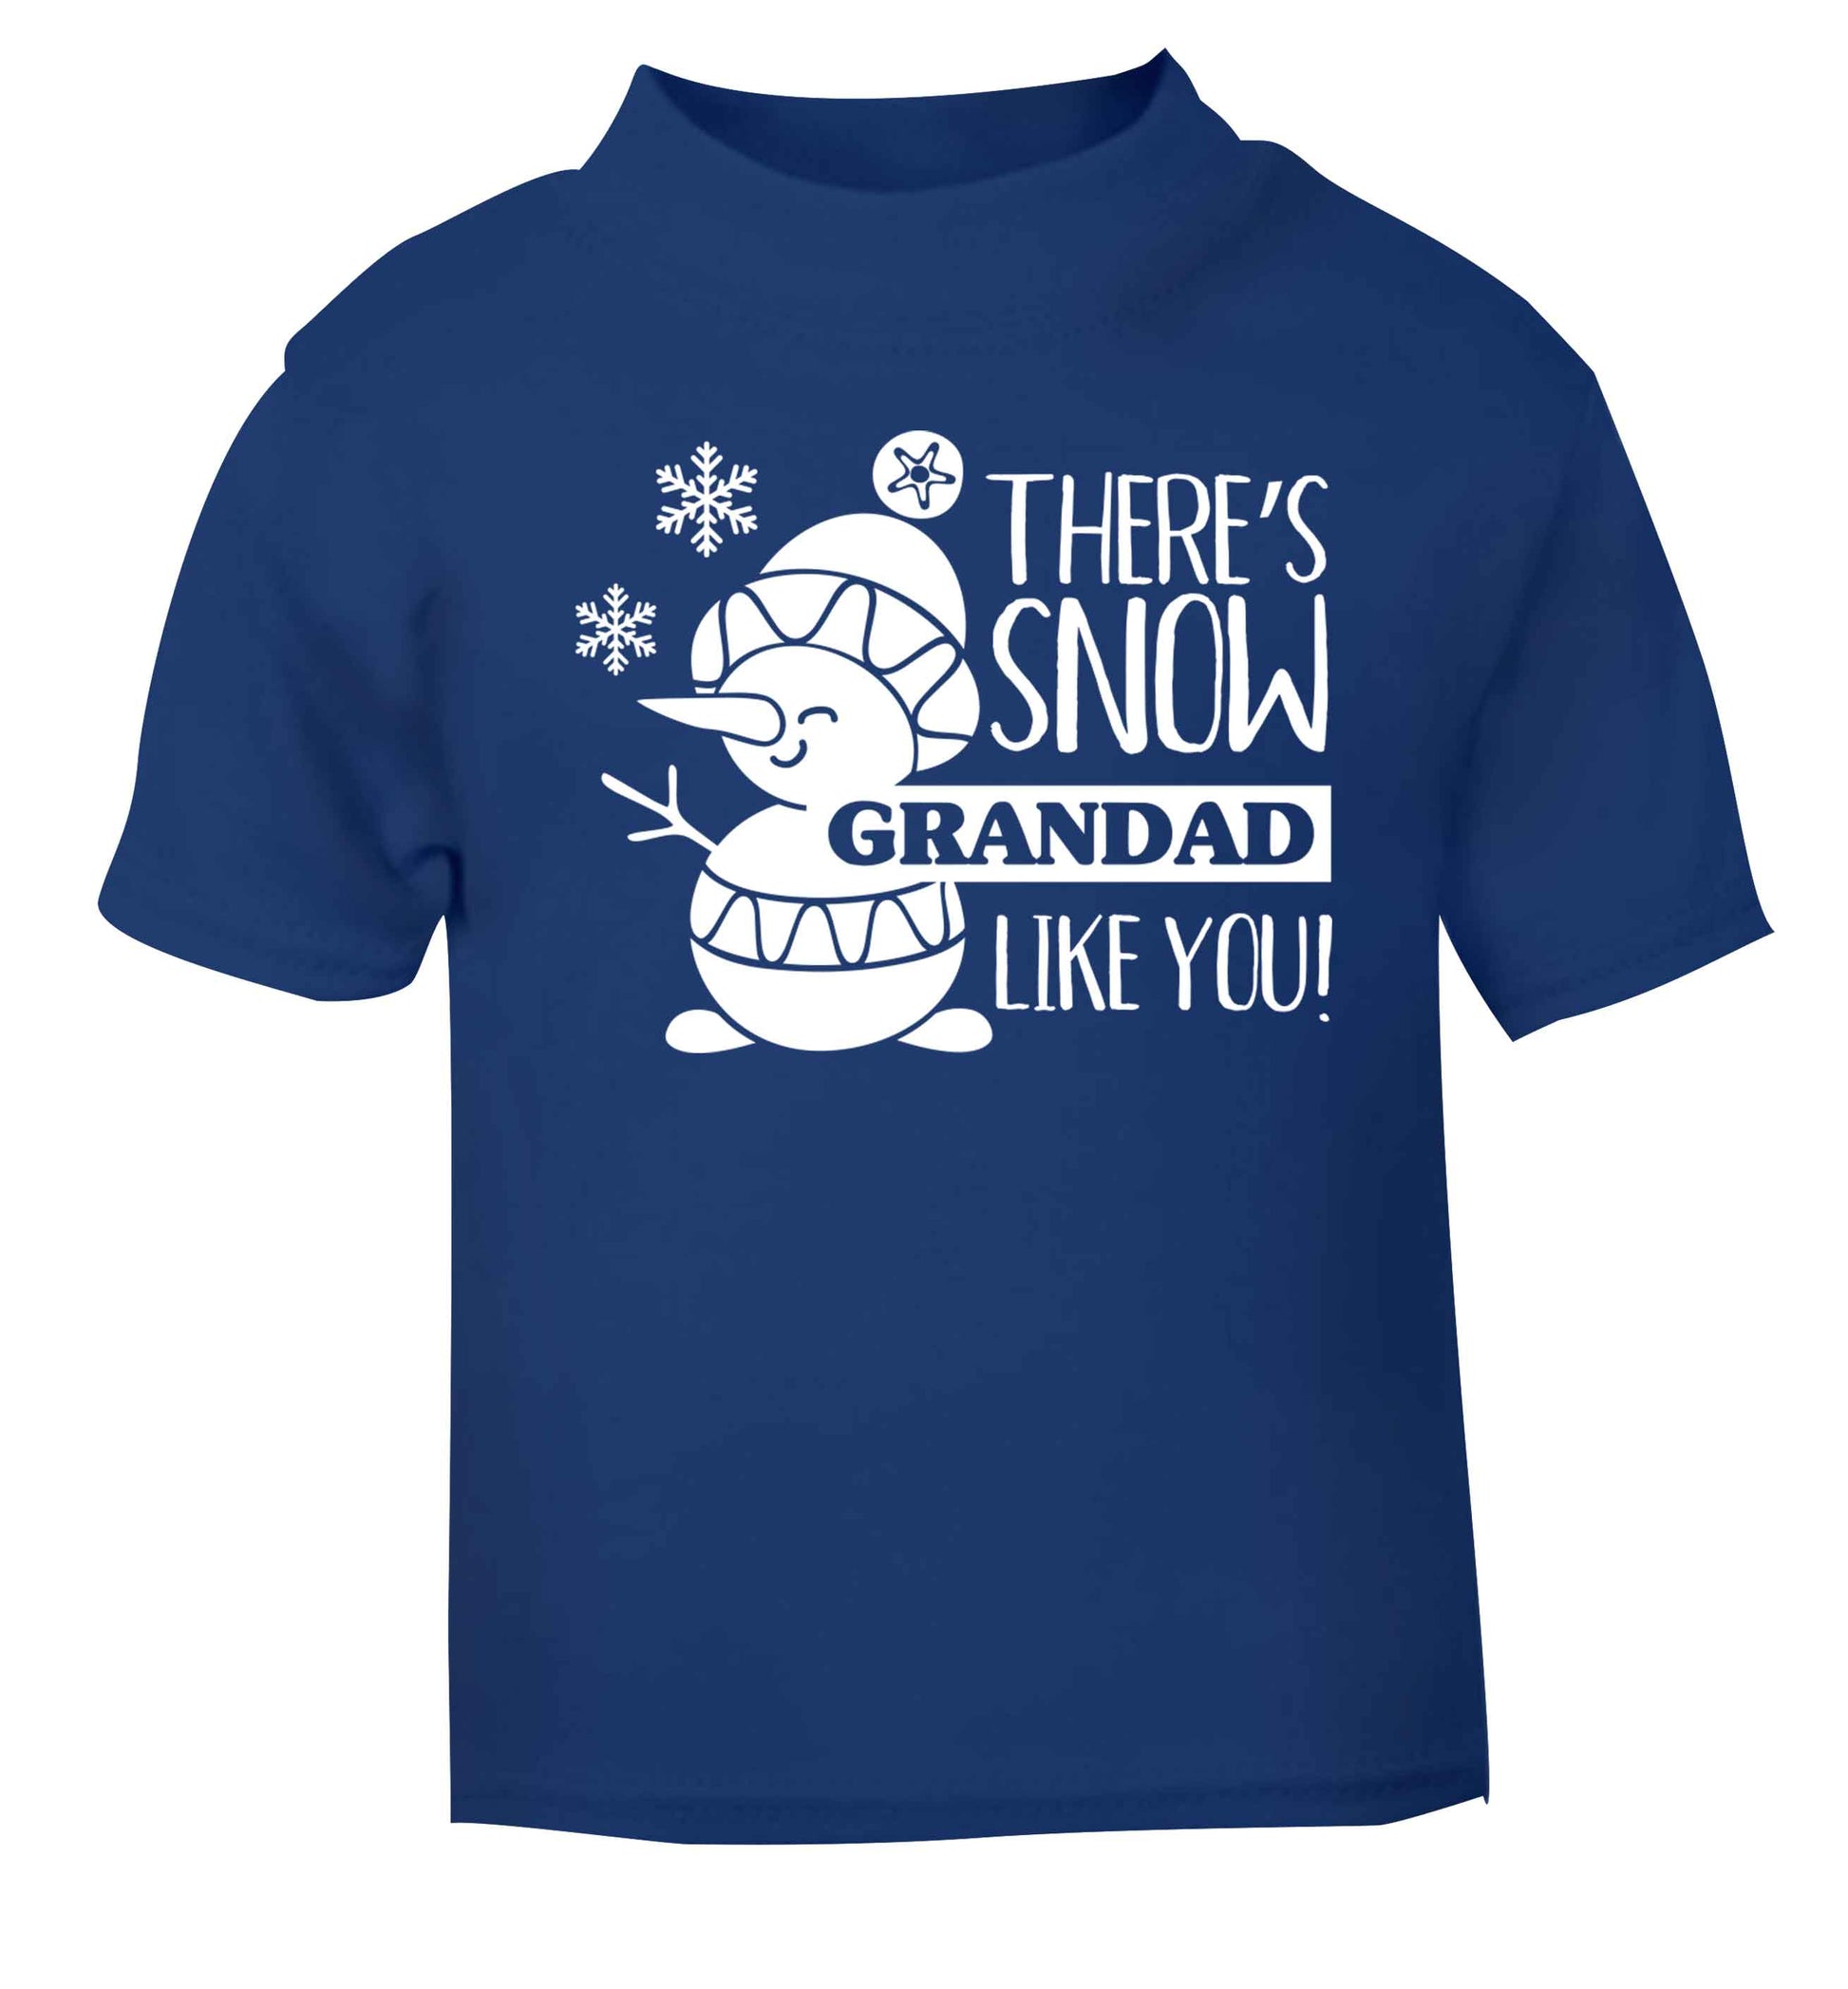 There's snow grandad like you blue baby toddler Tshirt 2 Years